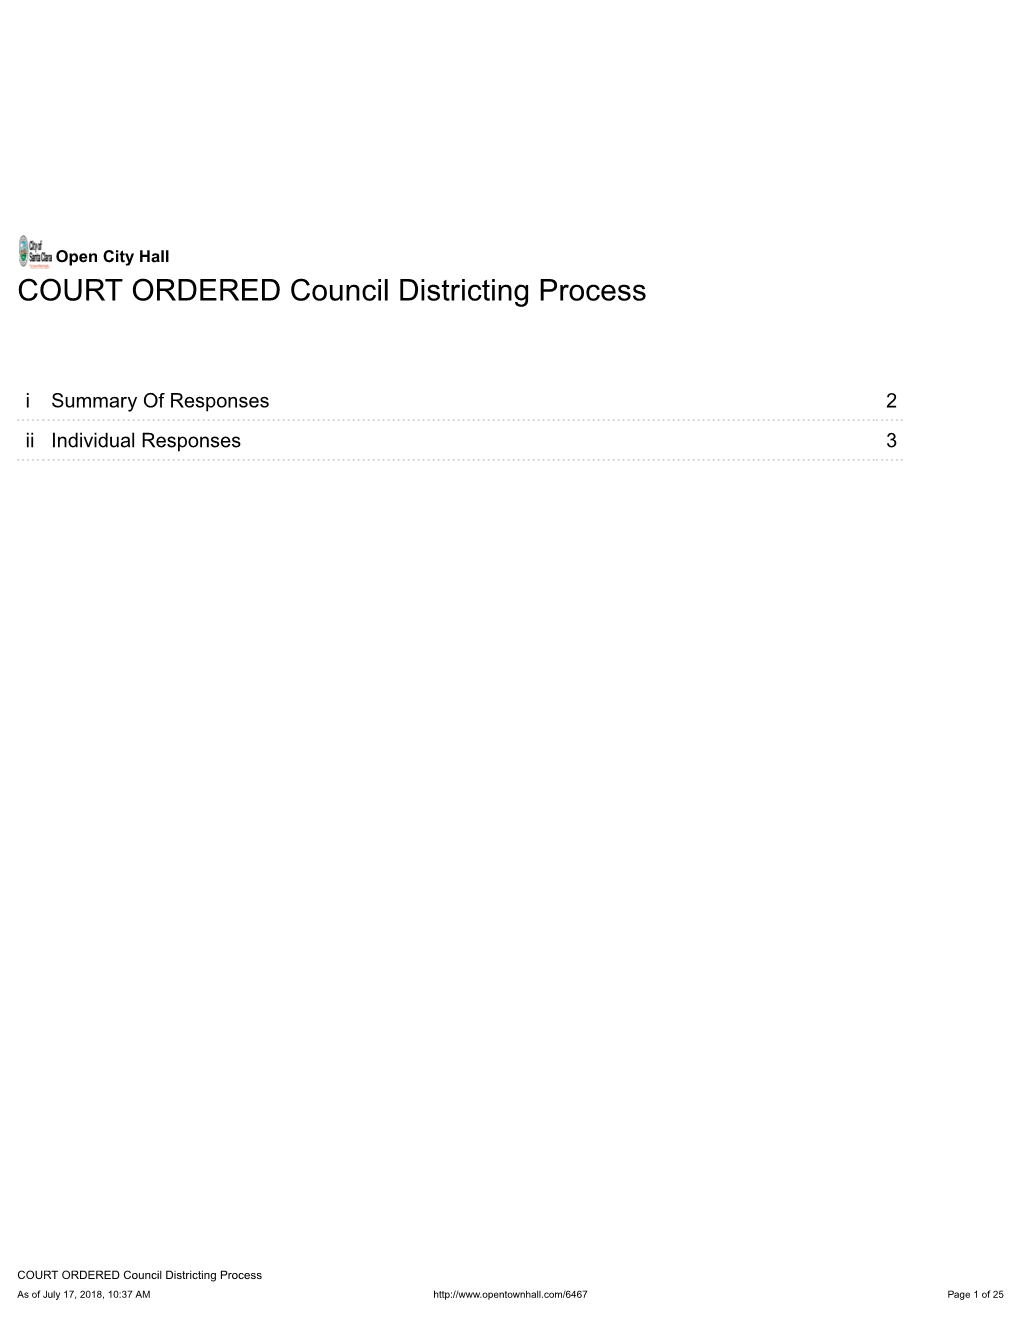 COURT ORDERED Council Districting Process